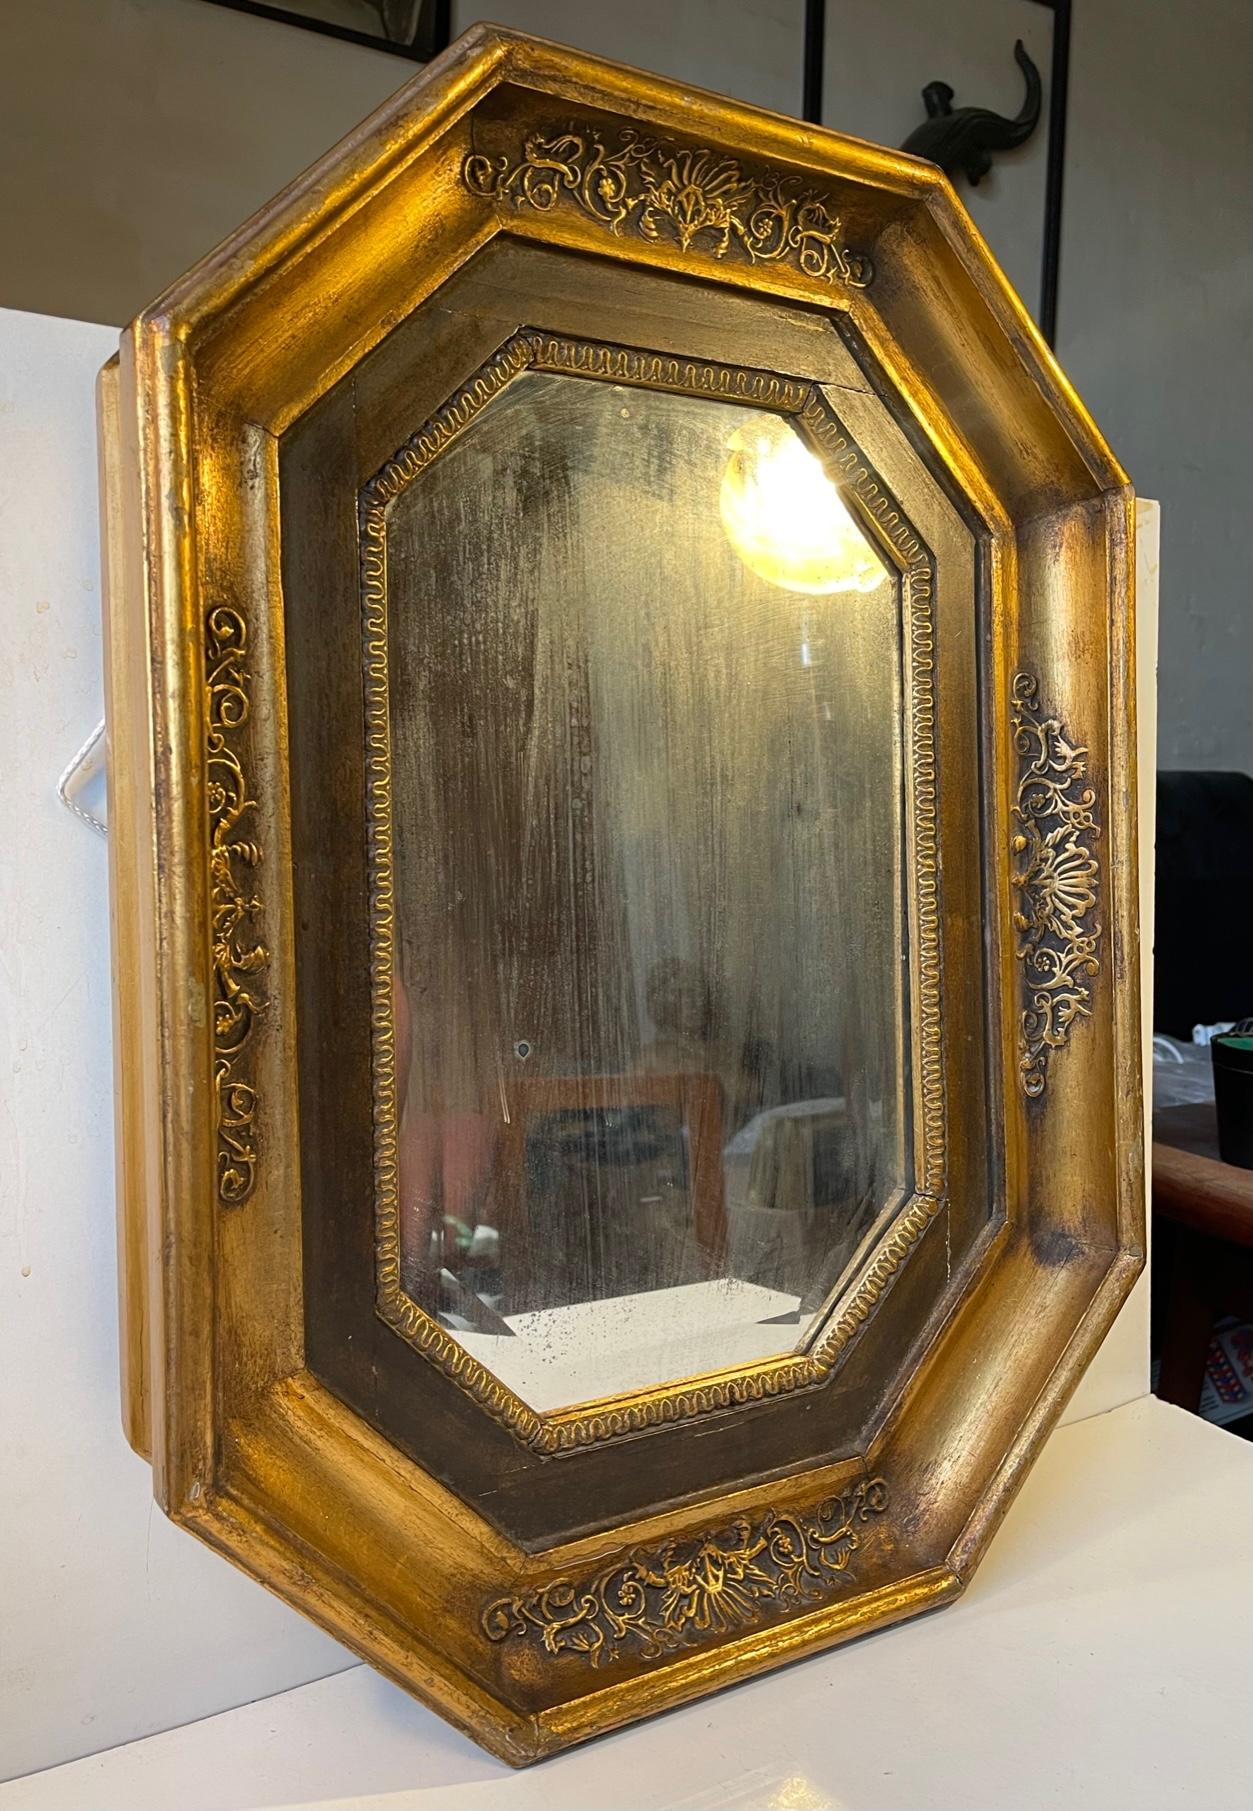 Gothic Revival Antique Octagonal Wall Mirror in Gilded Wood, 19th Century Scandinavia For Sale